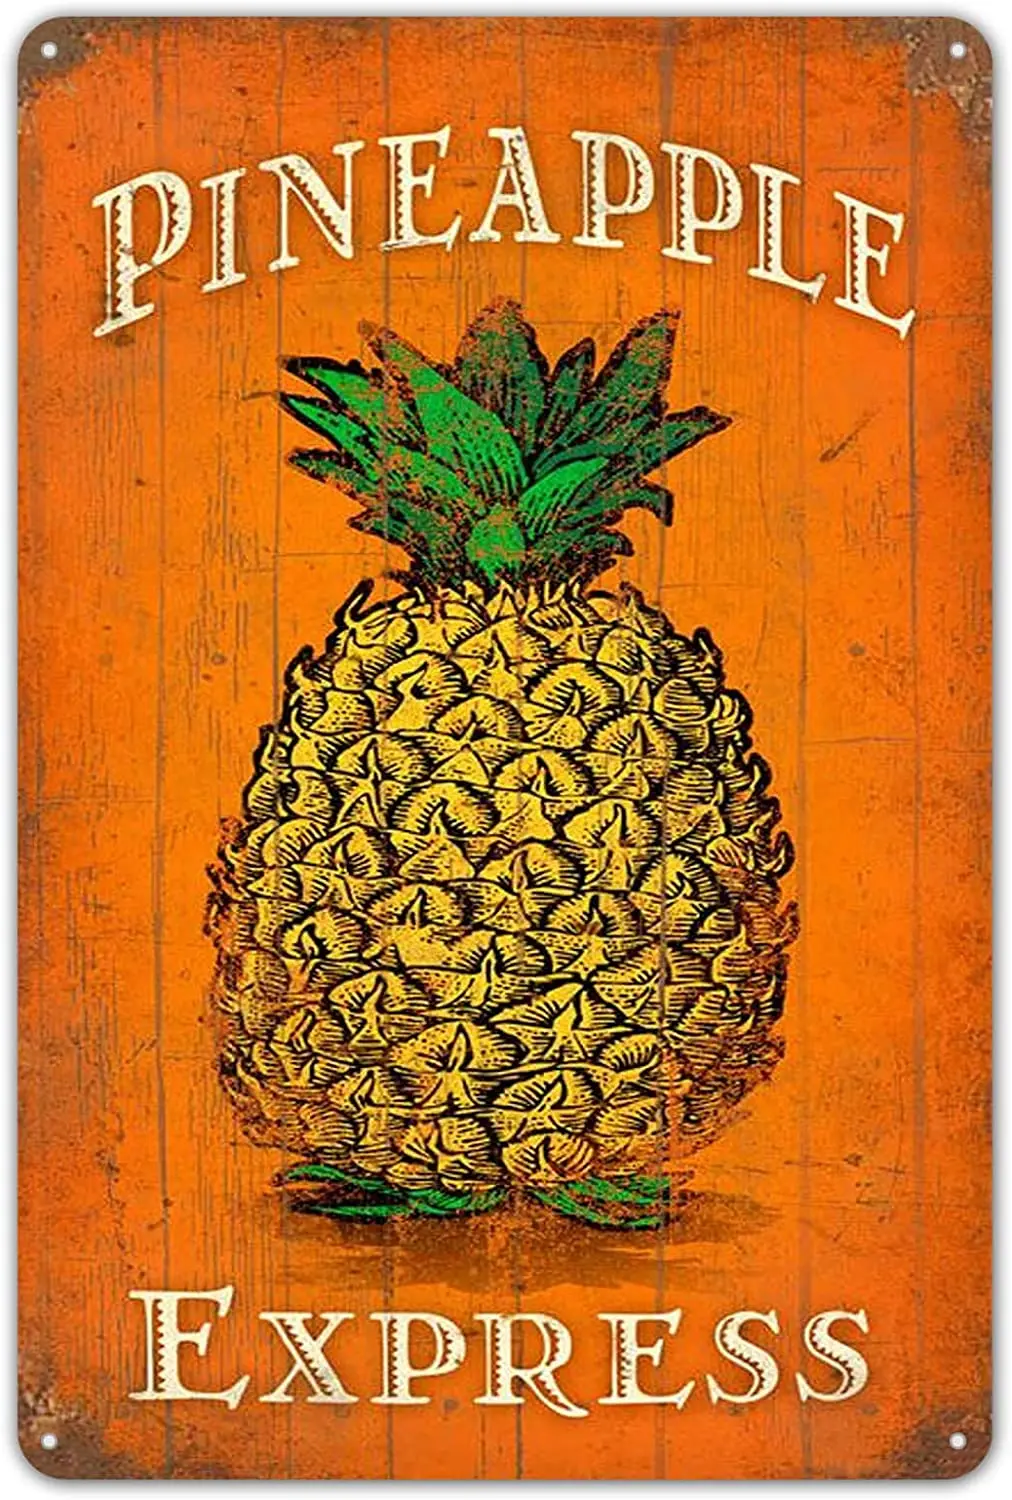 

Sarcarse Tin Signs Vintage Pineapple Express Metal Sign Poster Plate for Cafe Room Pub Restaurants Home Shop Wall Decor 8 x 12